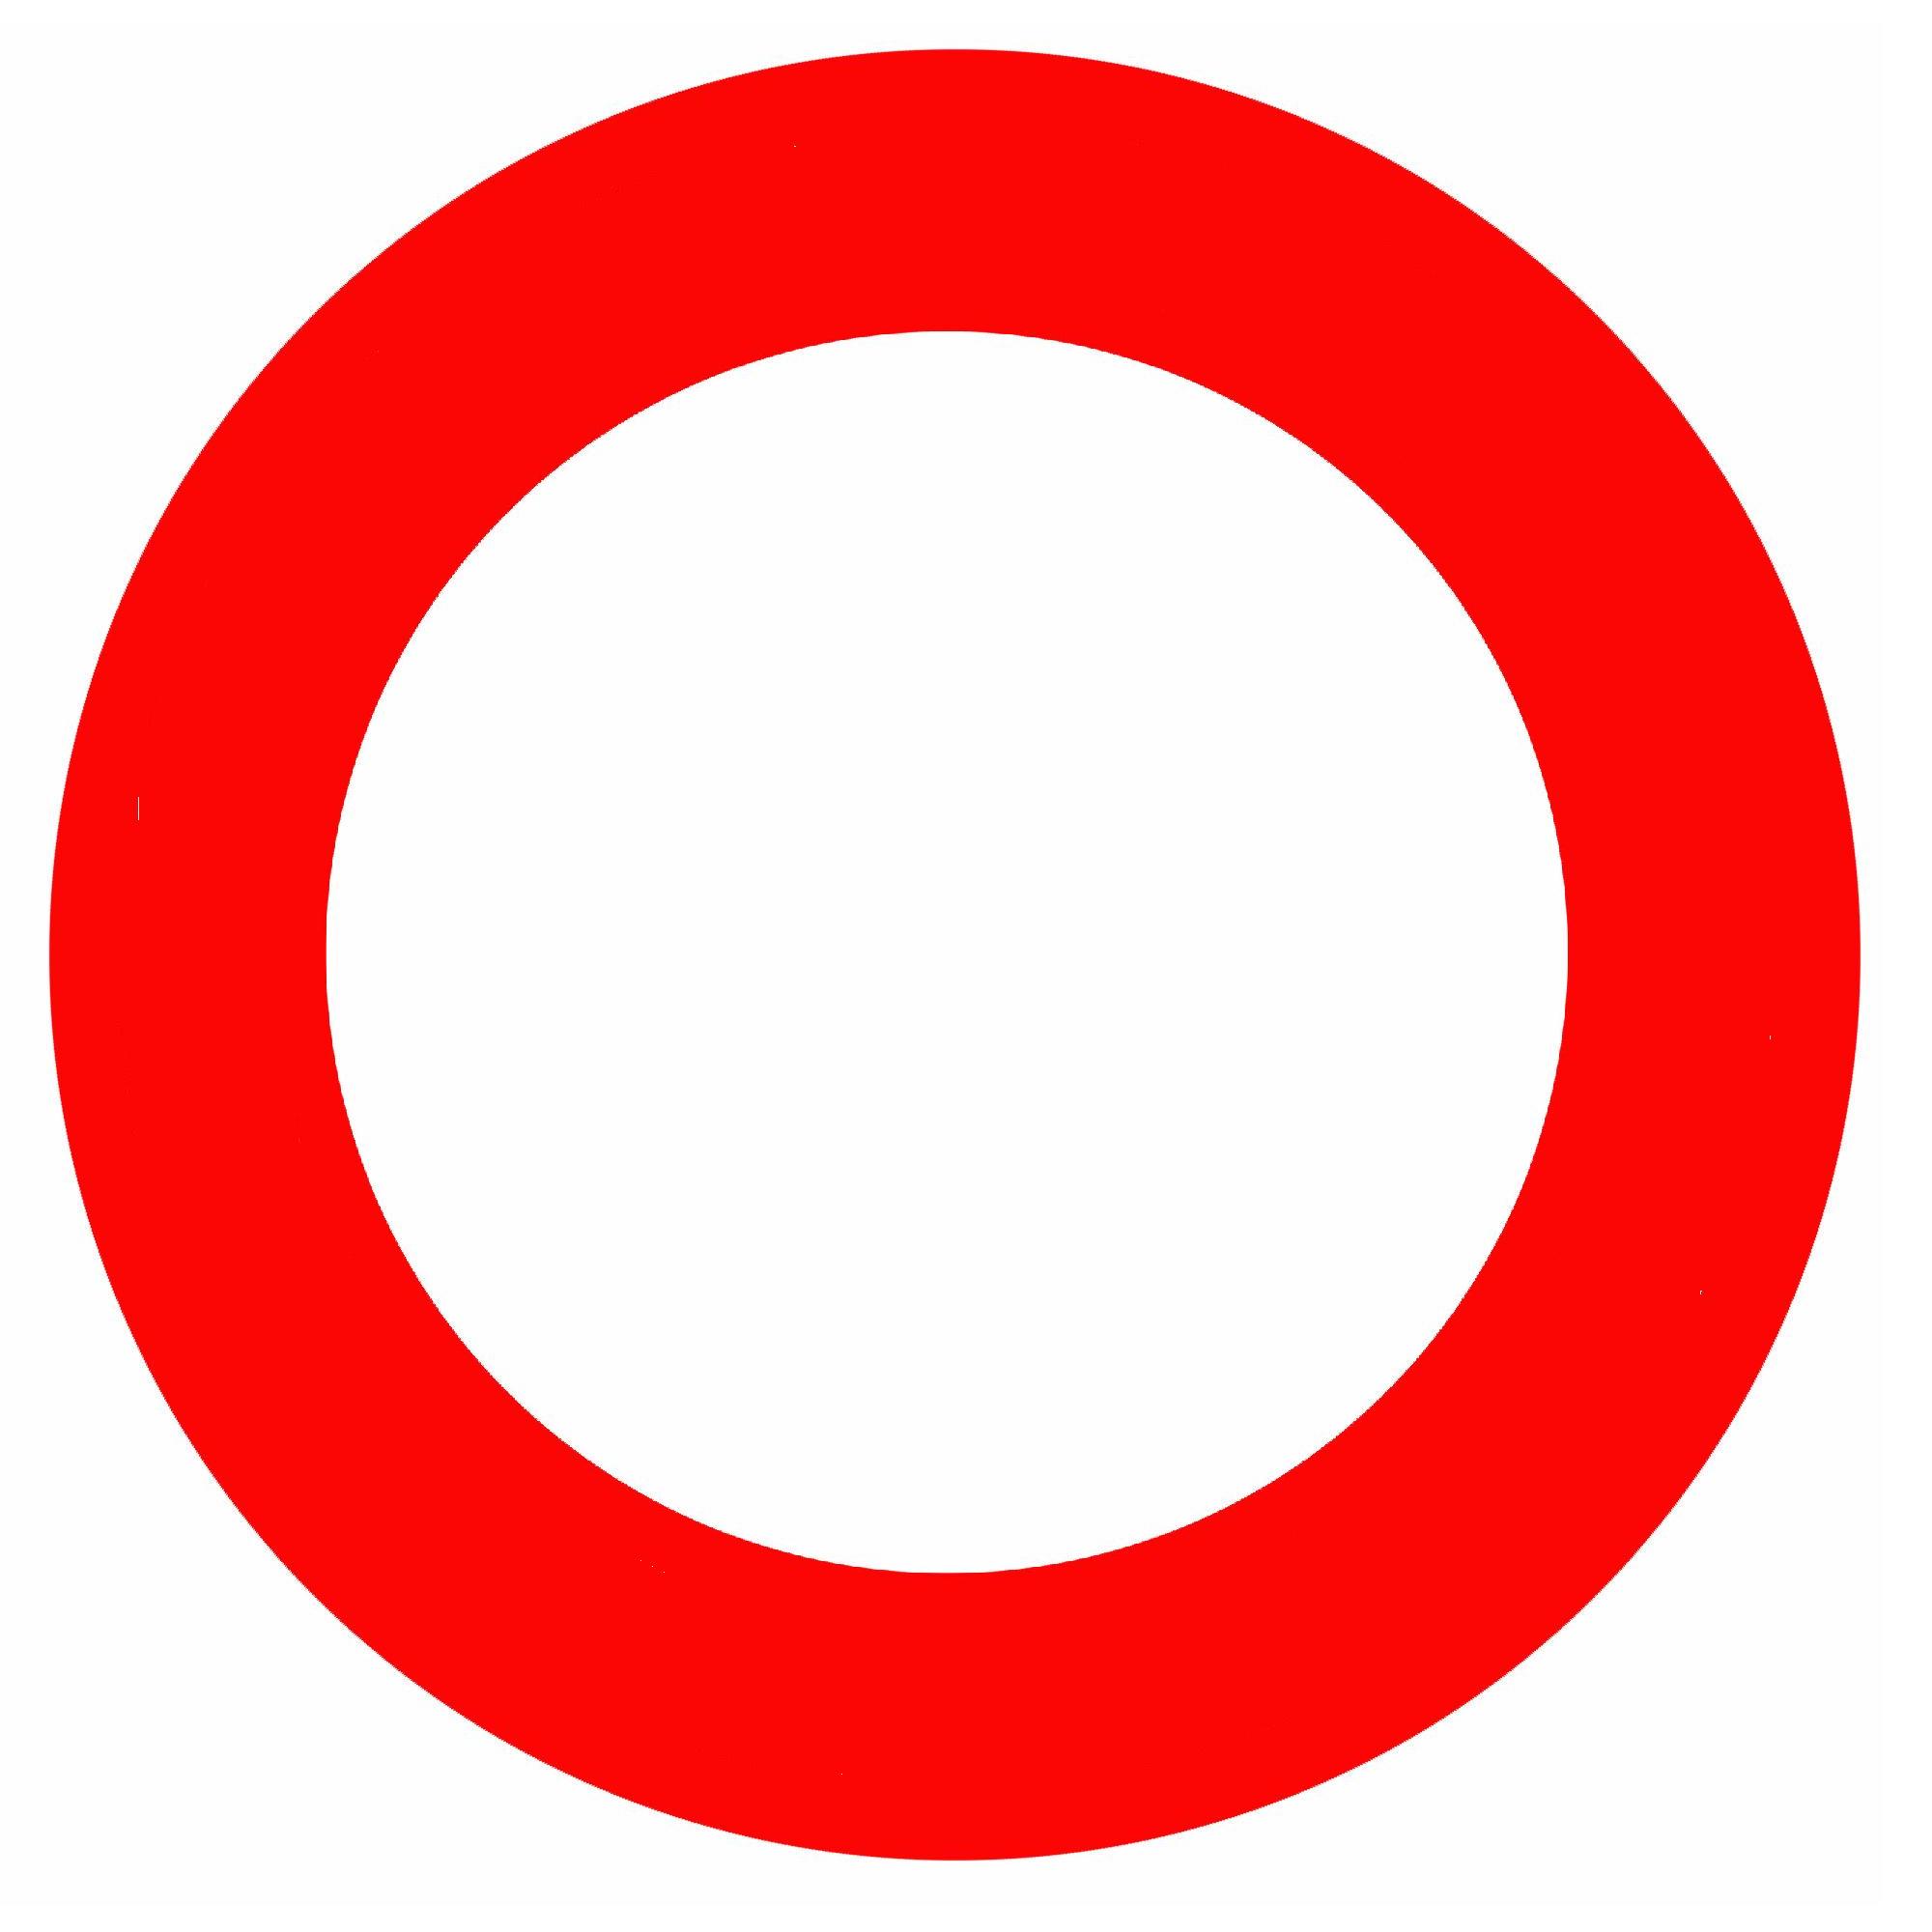 red-circle-image-free-download-on-clipartmag